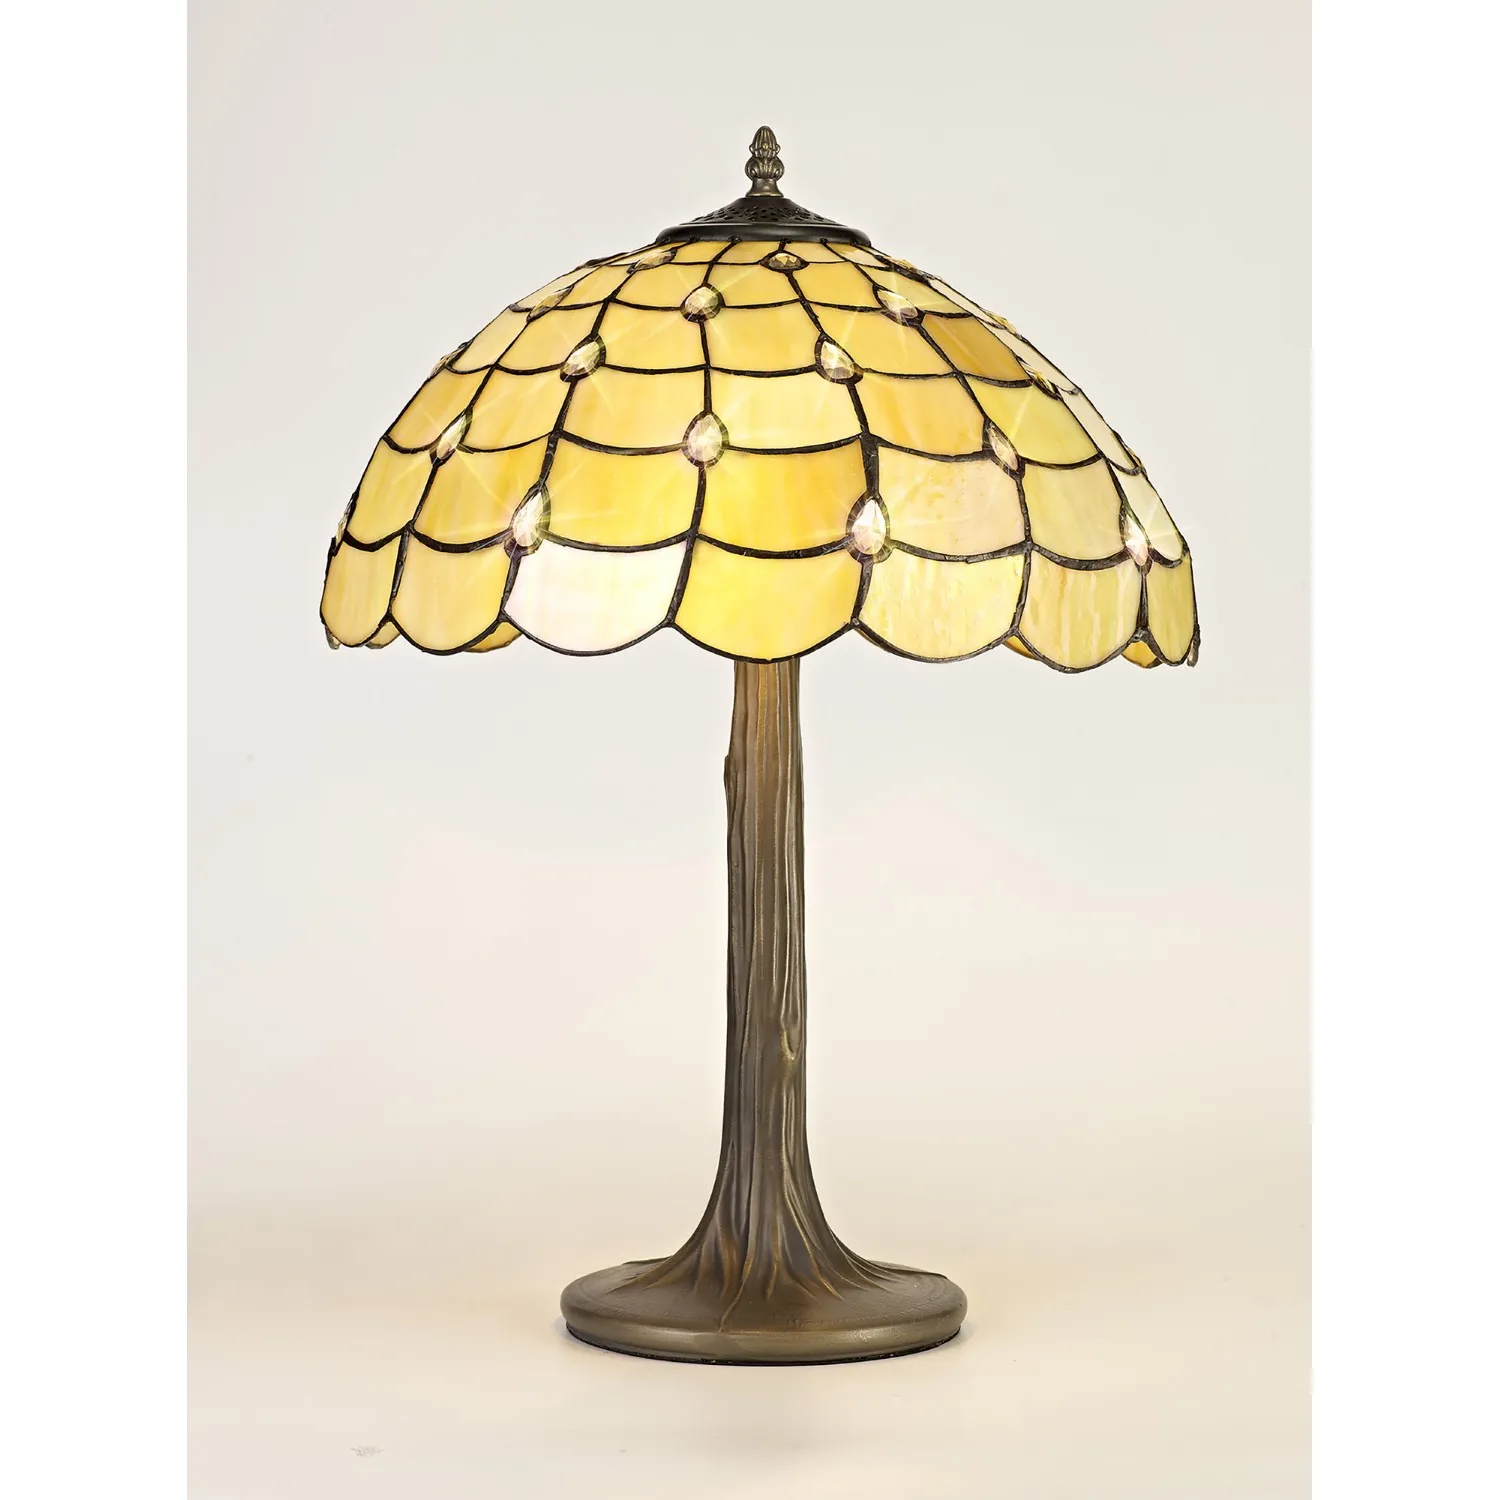 Stratford 2 Light Tree Like Table Lamp E27 With 40cm Tiffany Shade, Beige Clear Crystal Aged Antique Brass